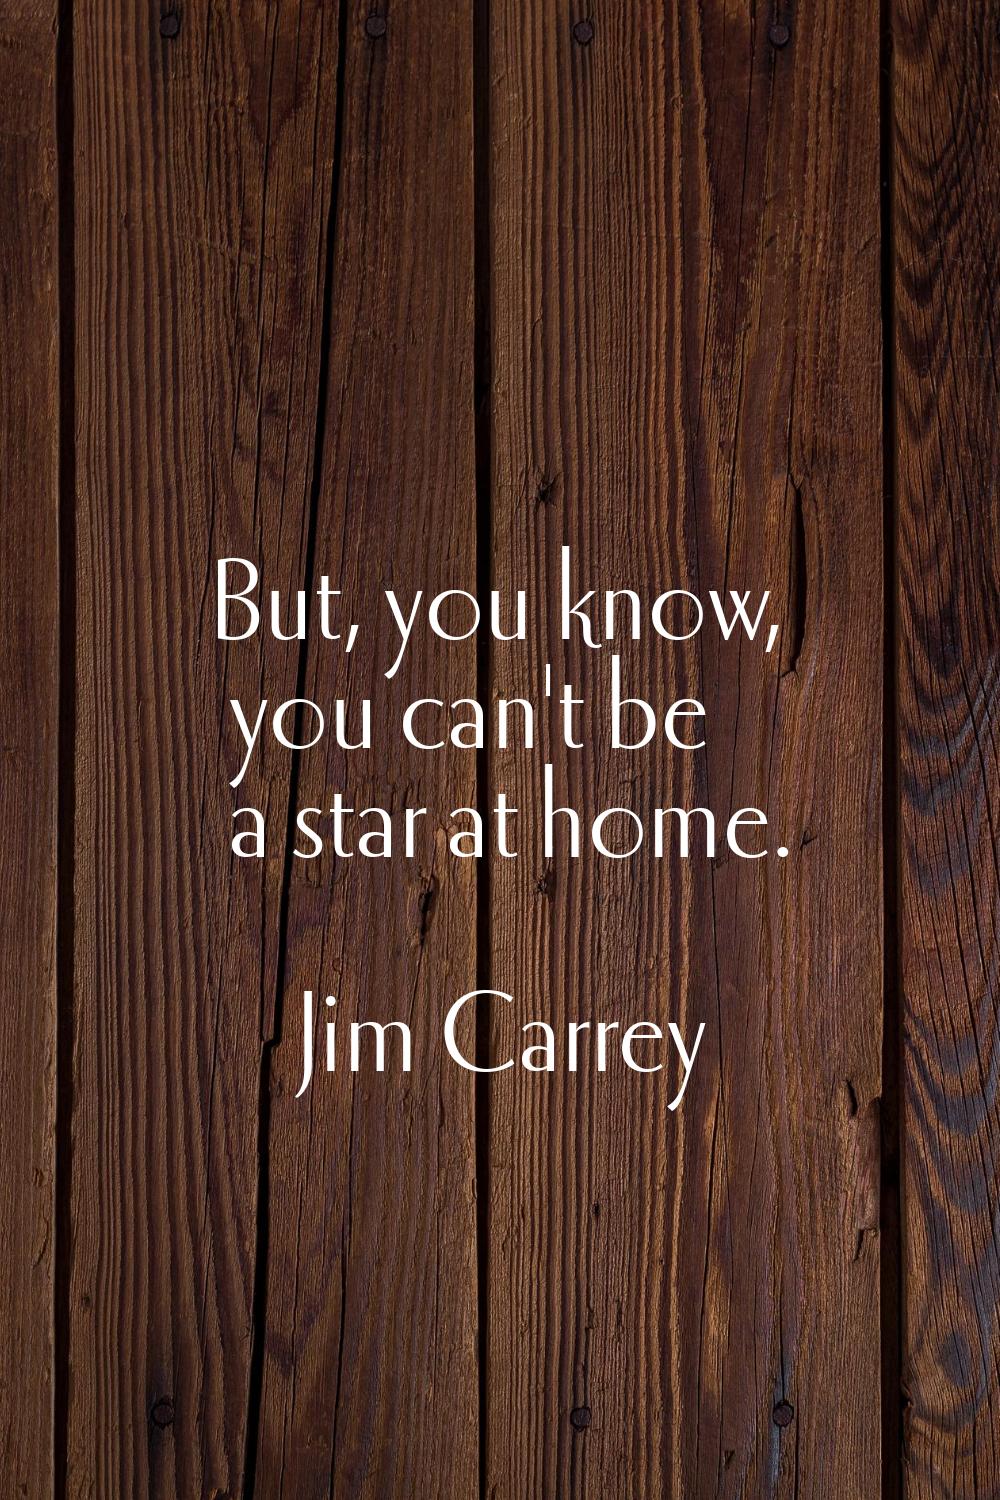 But, you know, you can't be a star at home.